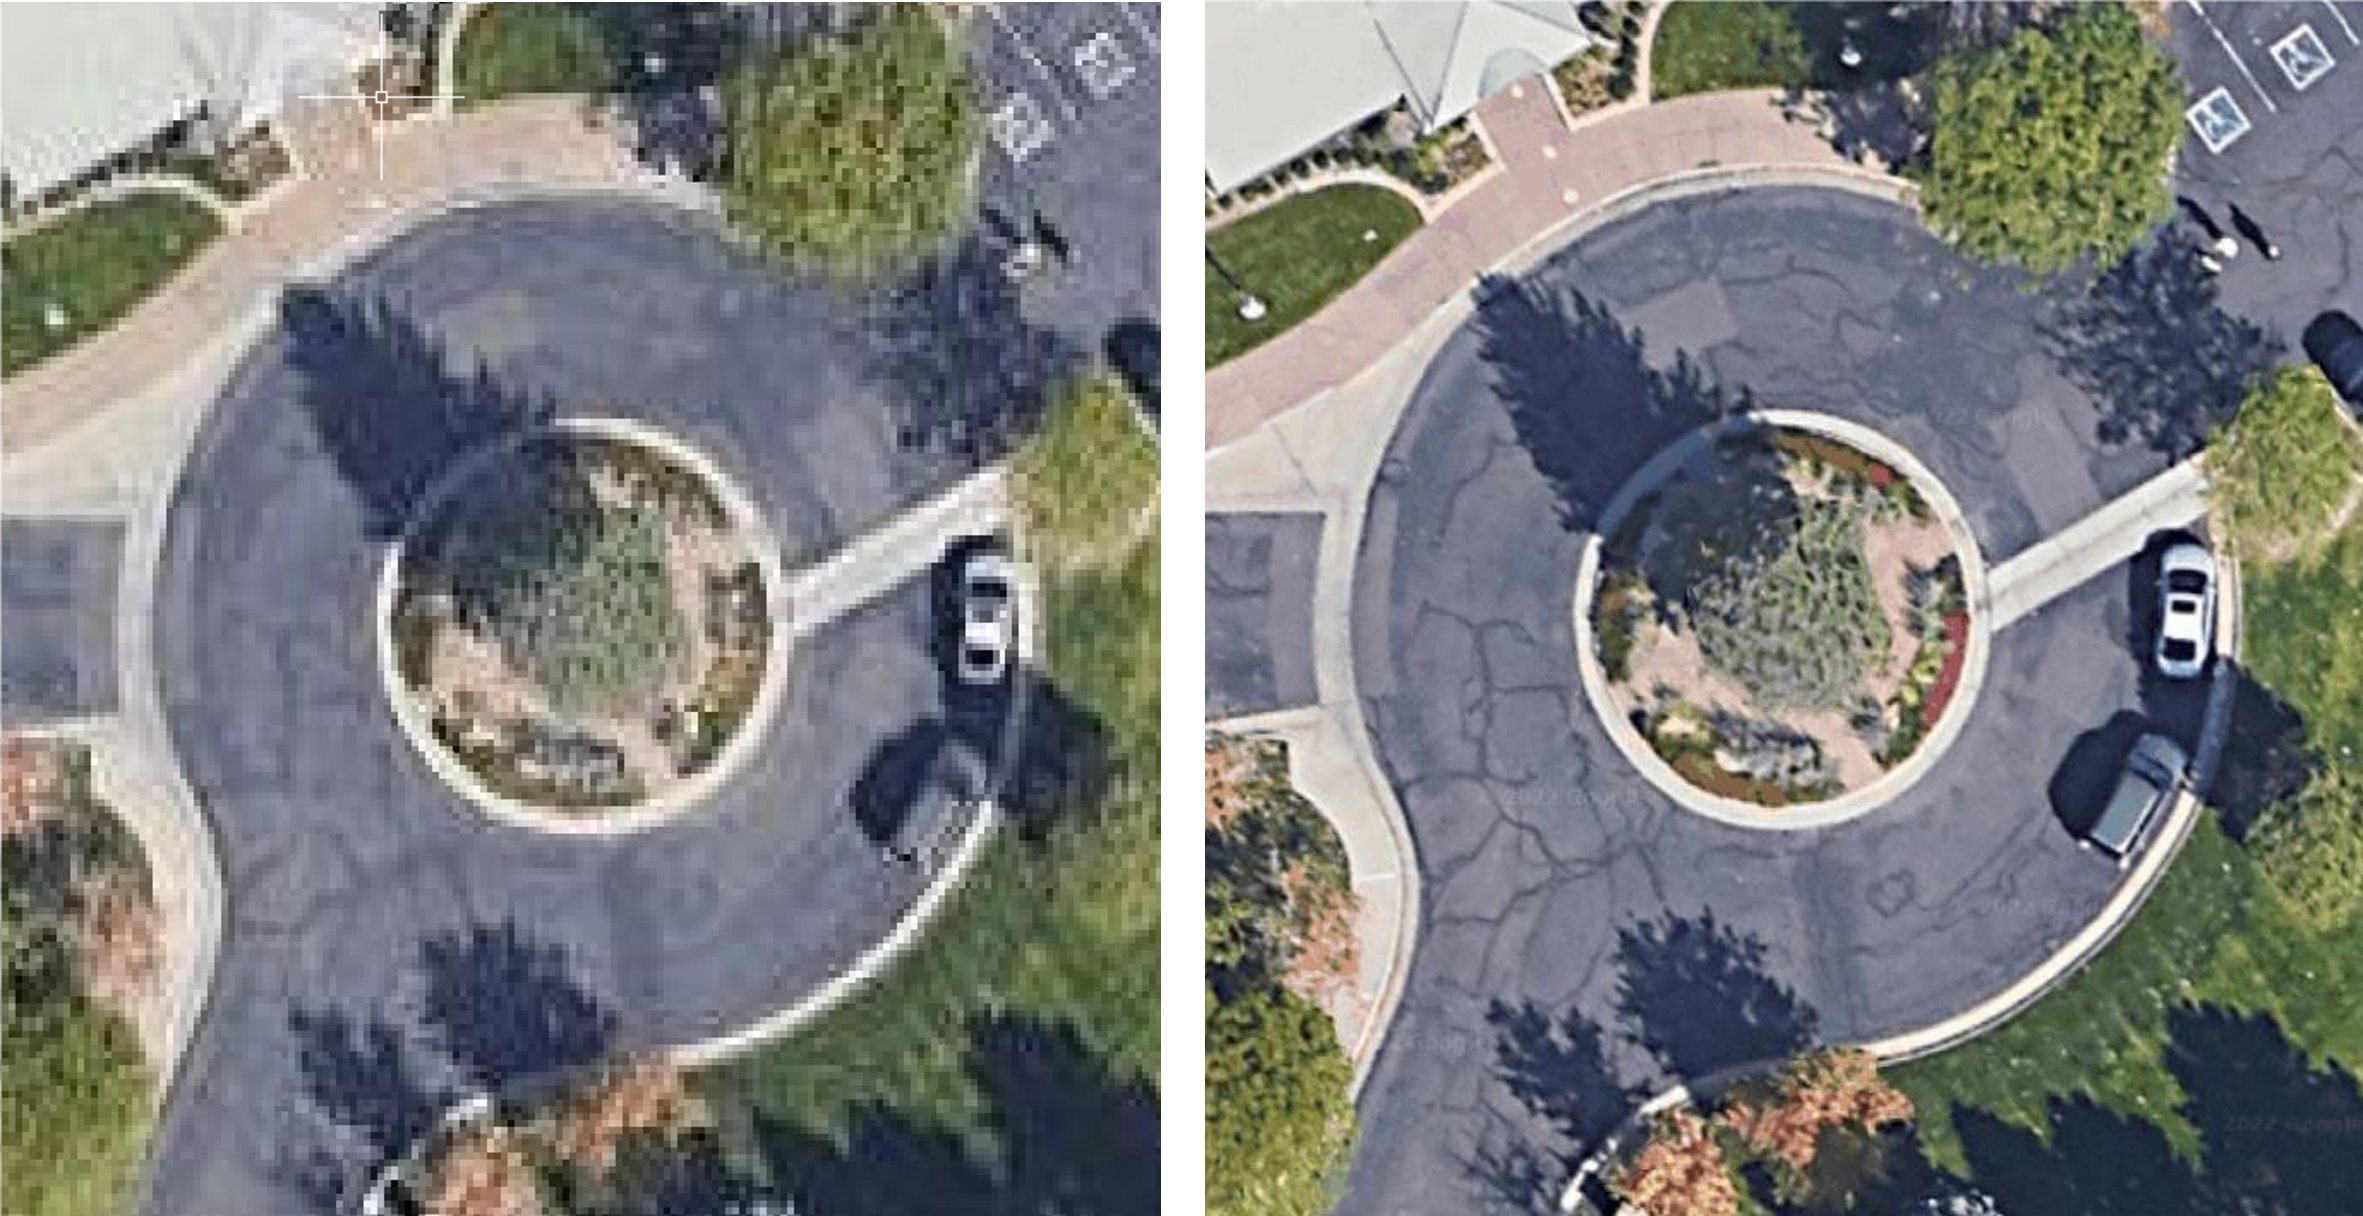 Quick_View__zoom_level_19__vs._Mosaic__zoom_level_21_.png